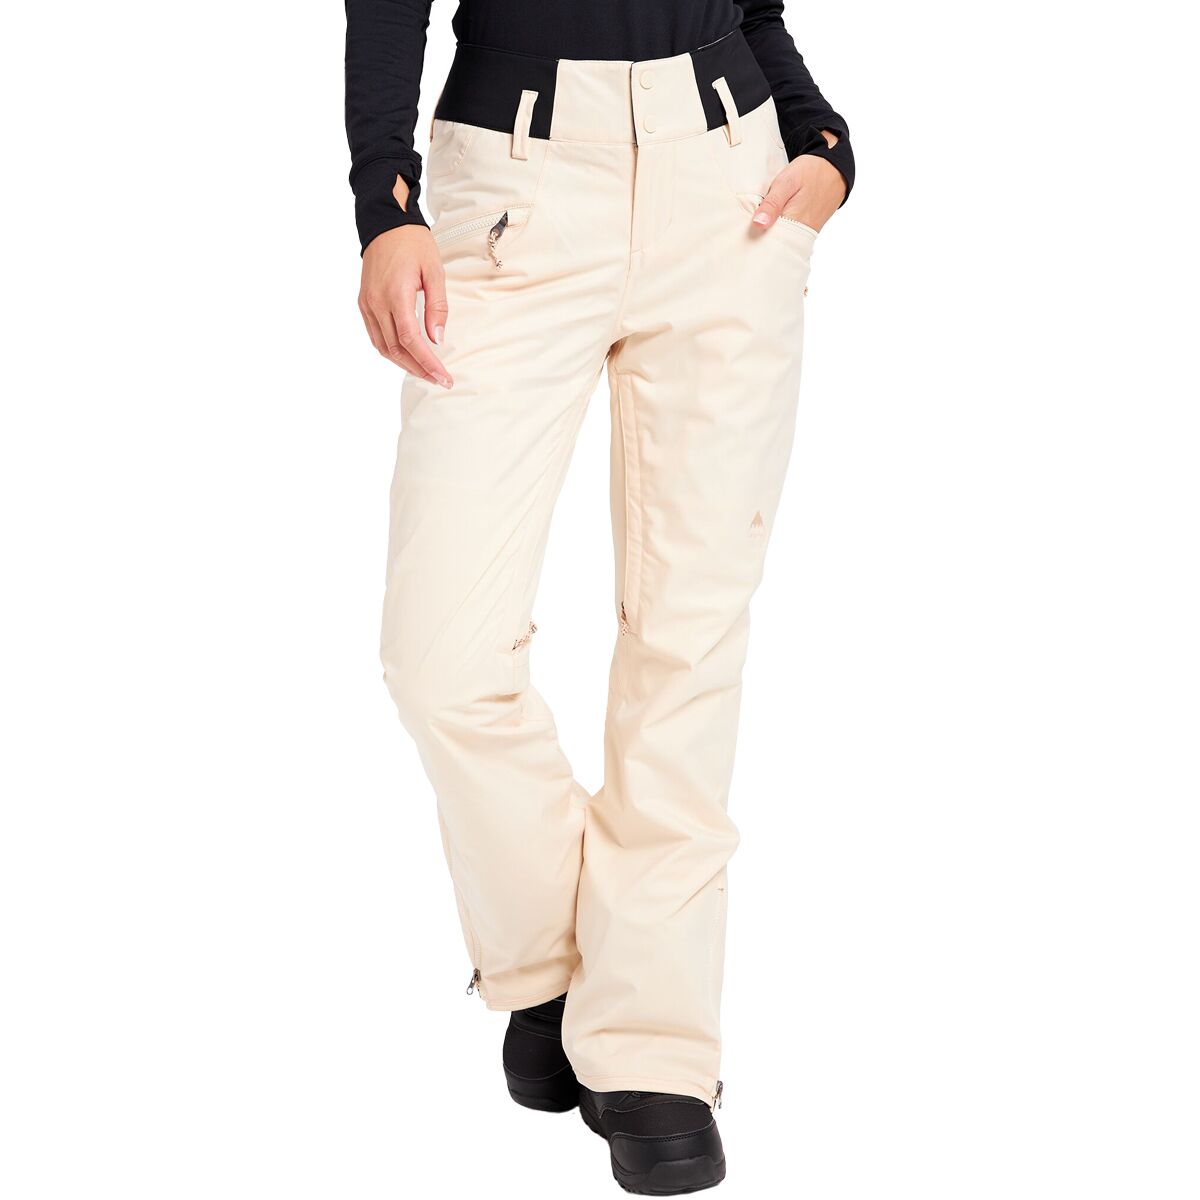 Marcy High Rise Pant - Women